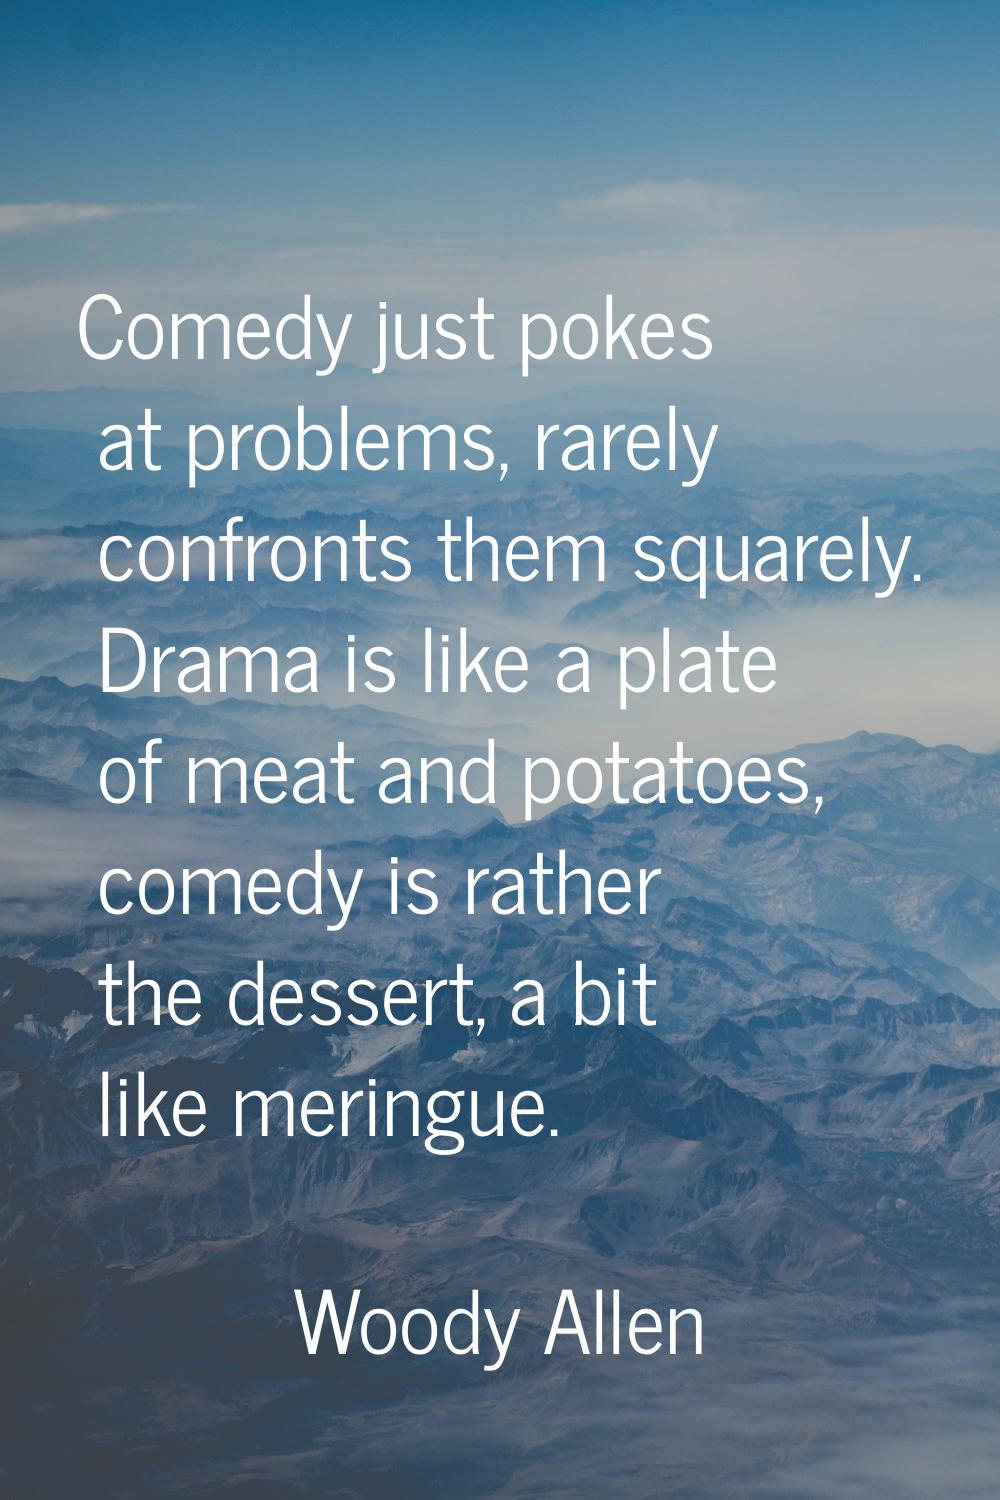 Comedy just pokes at problems, rarely confronts them squarely. Drama is like a plate of meat and po